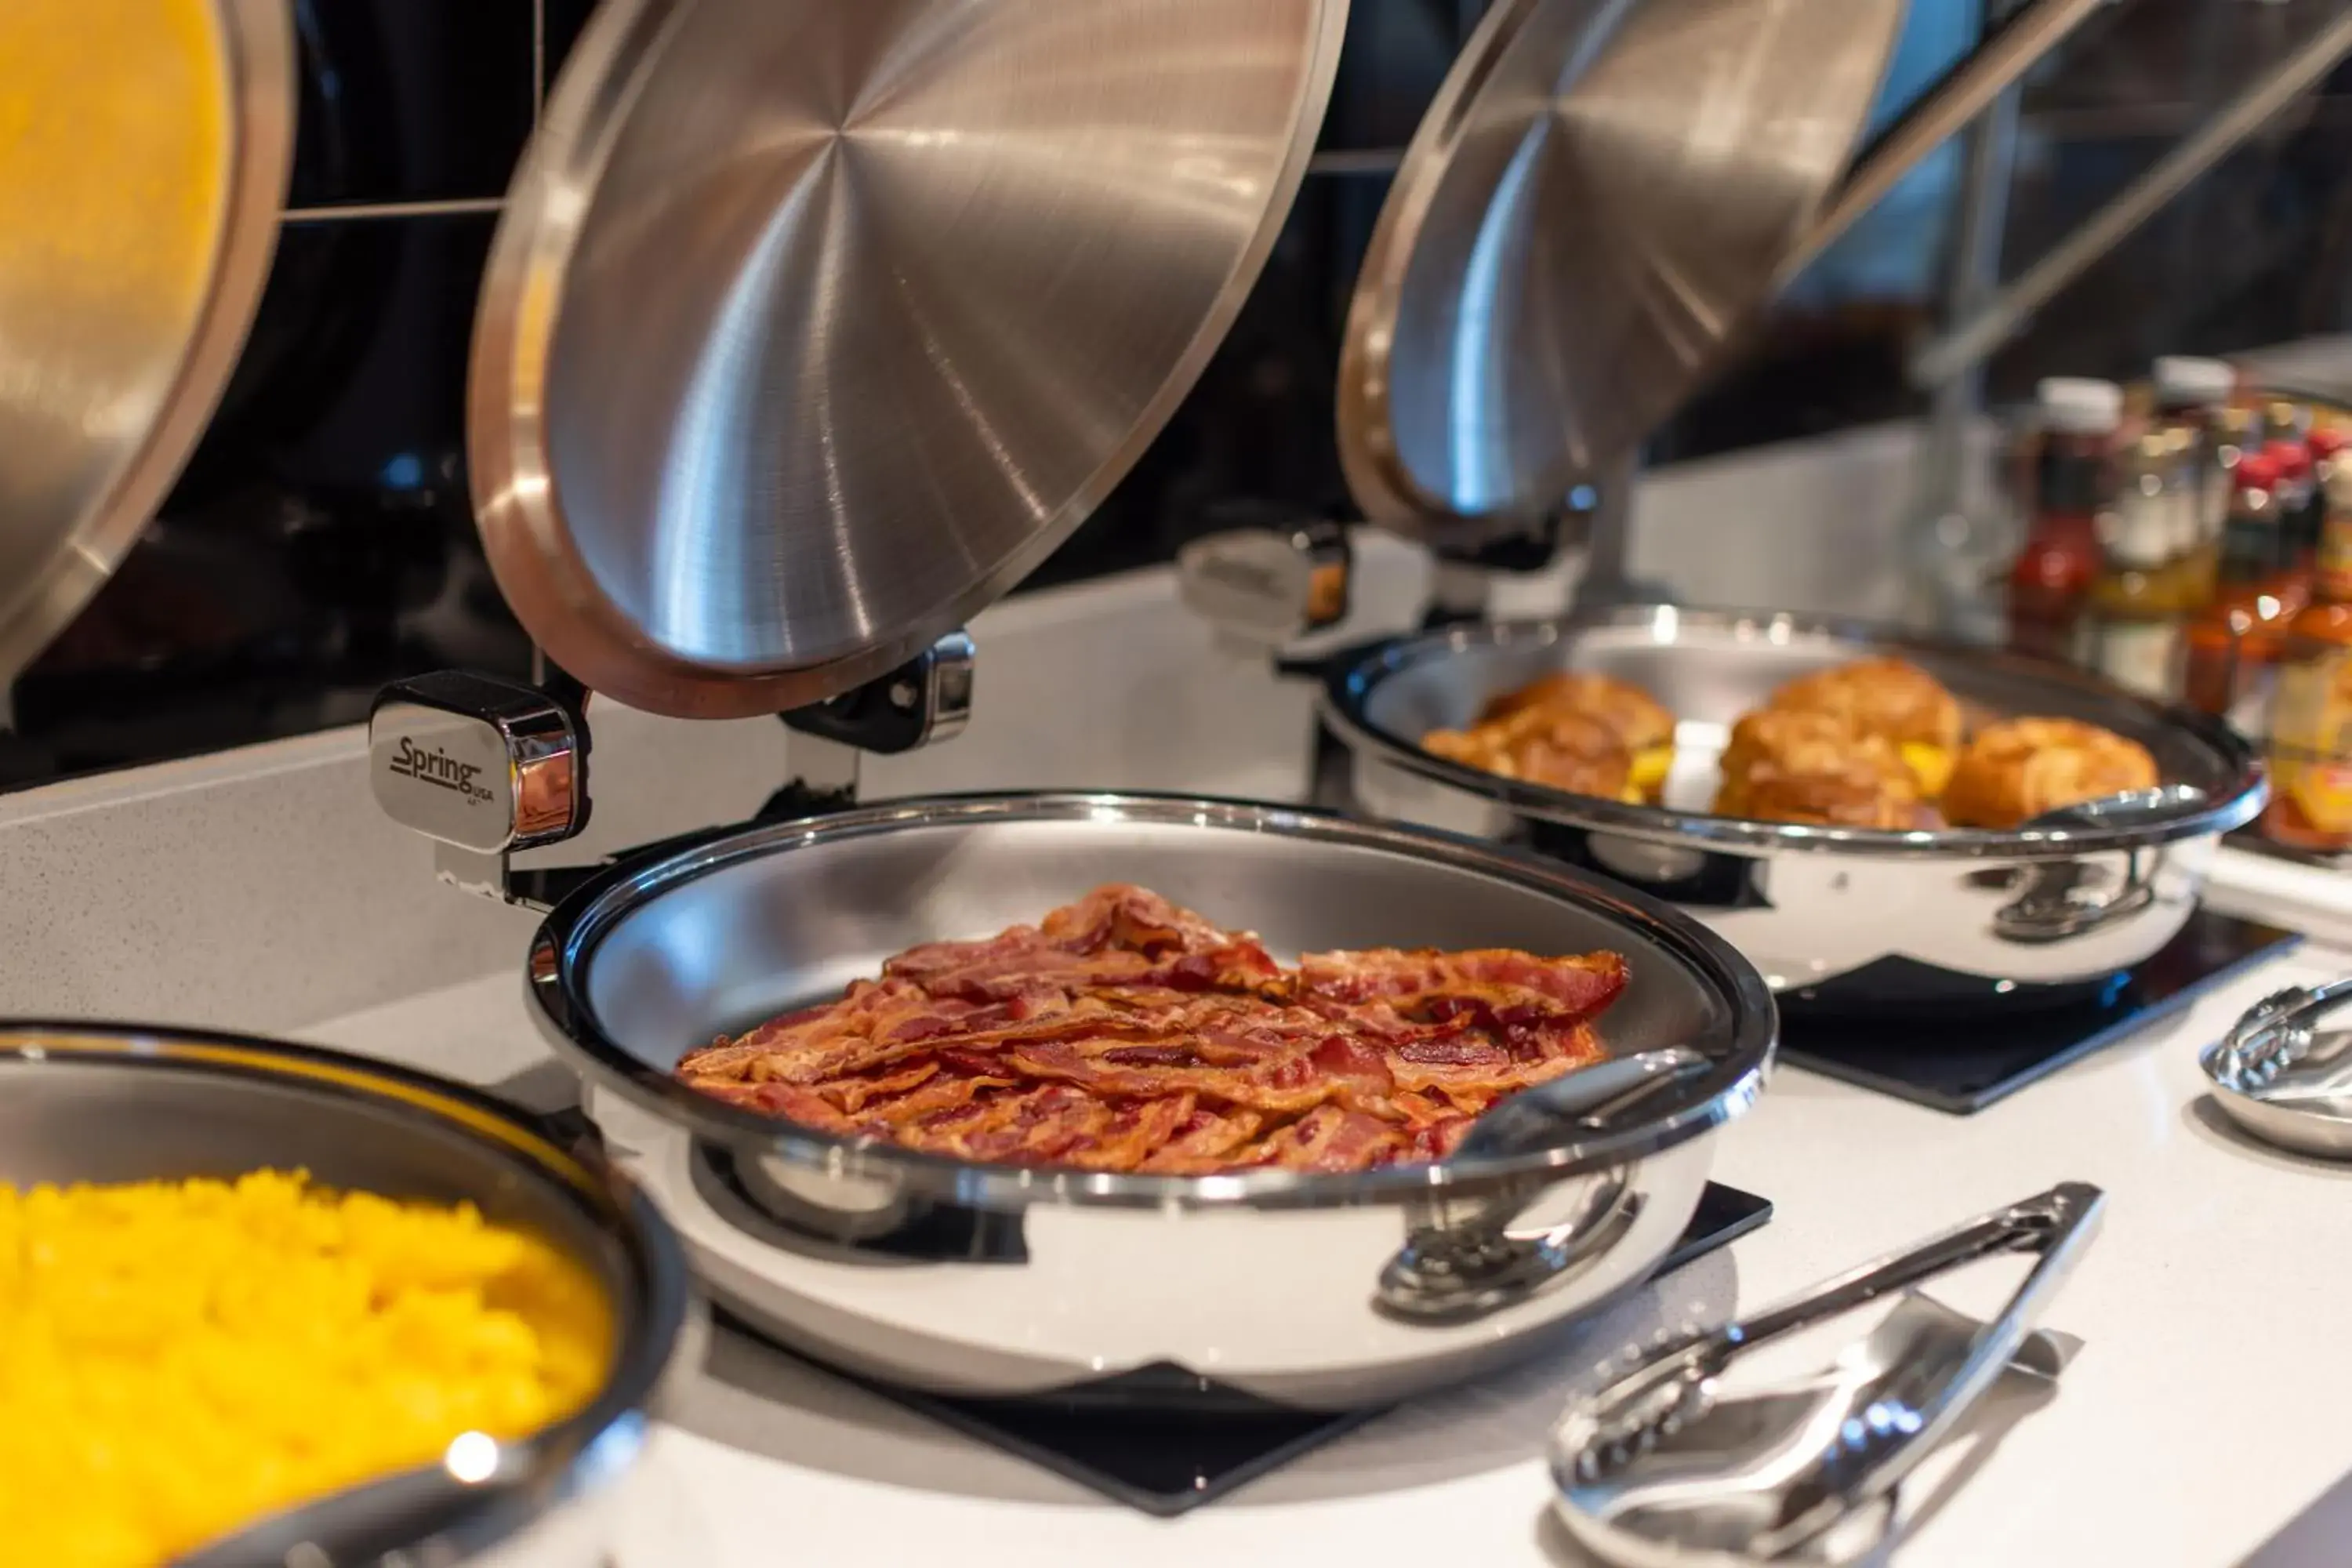 Buffet breakfast in SpringHill Suites by Marriott Tucson at The Bridges